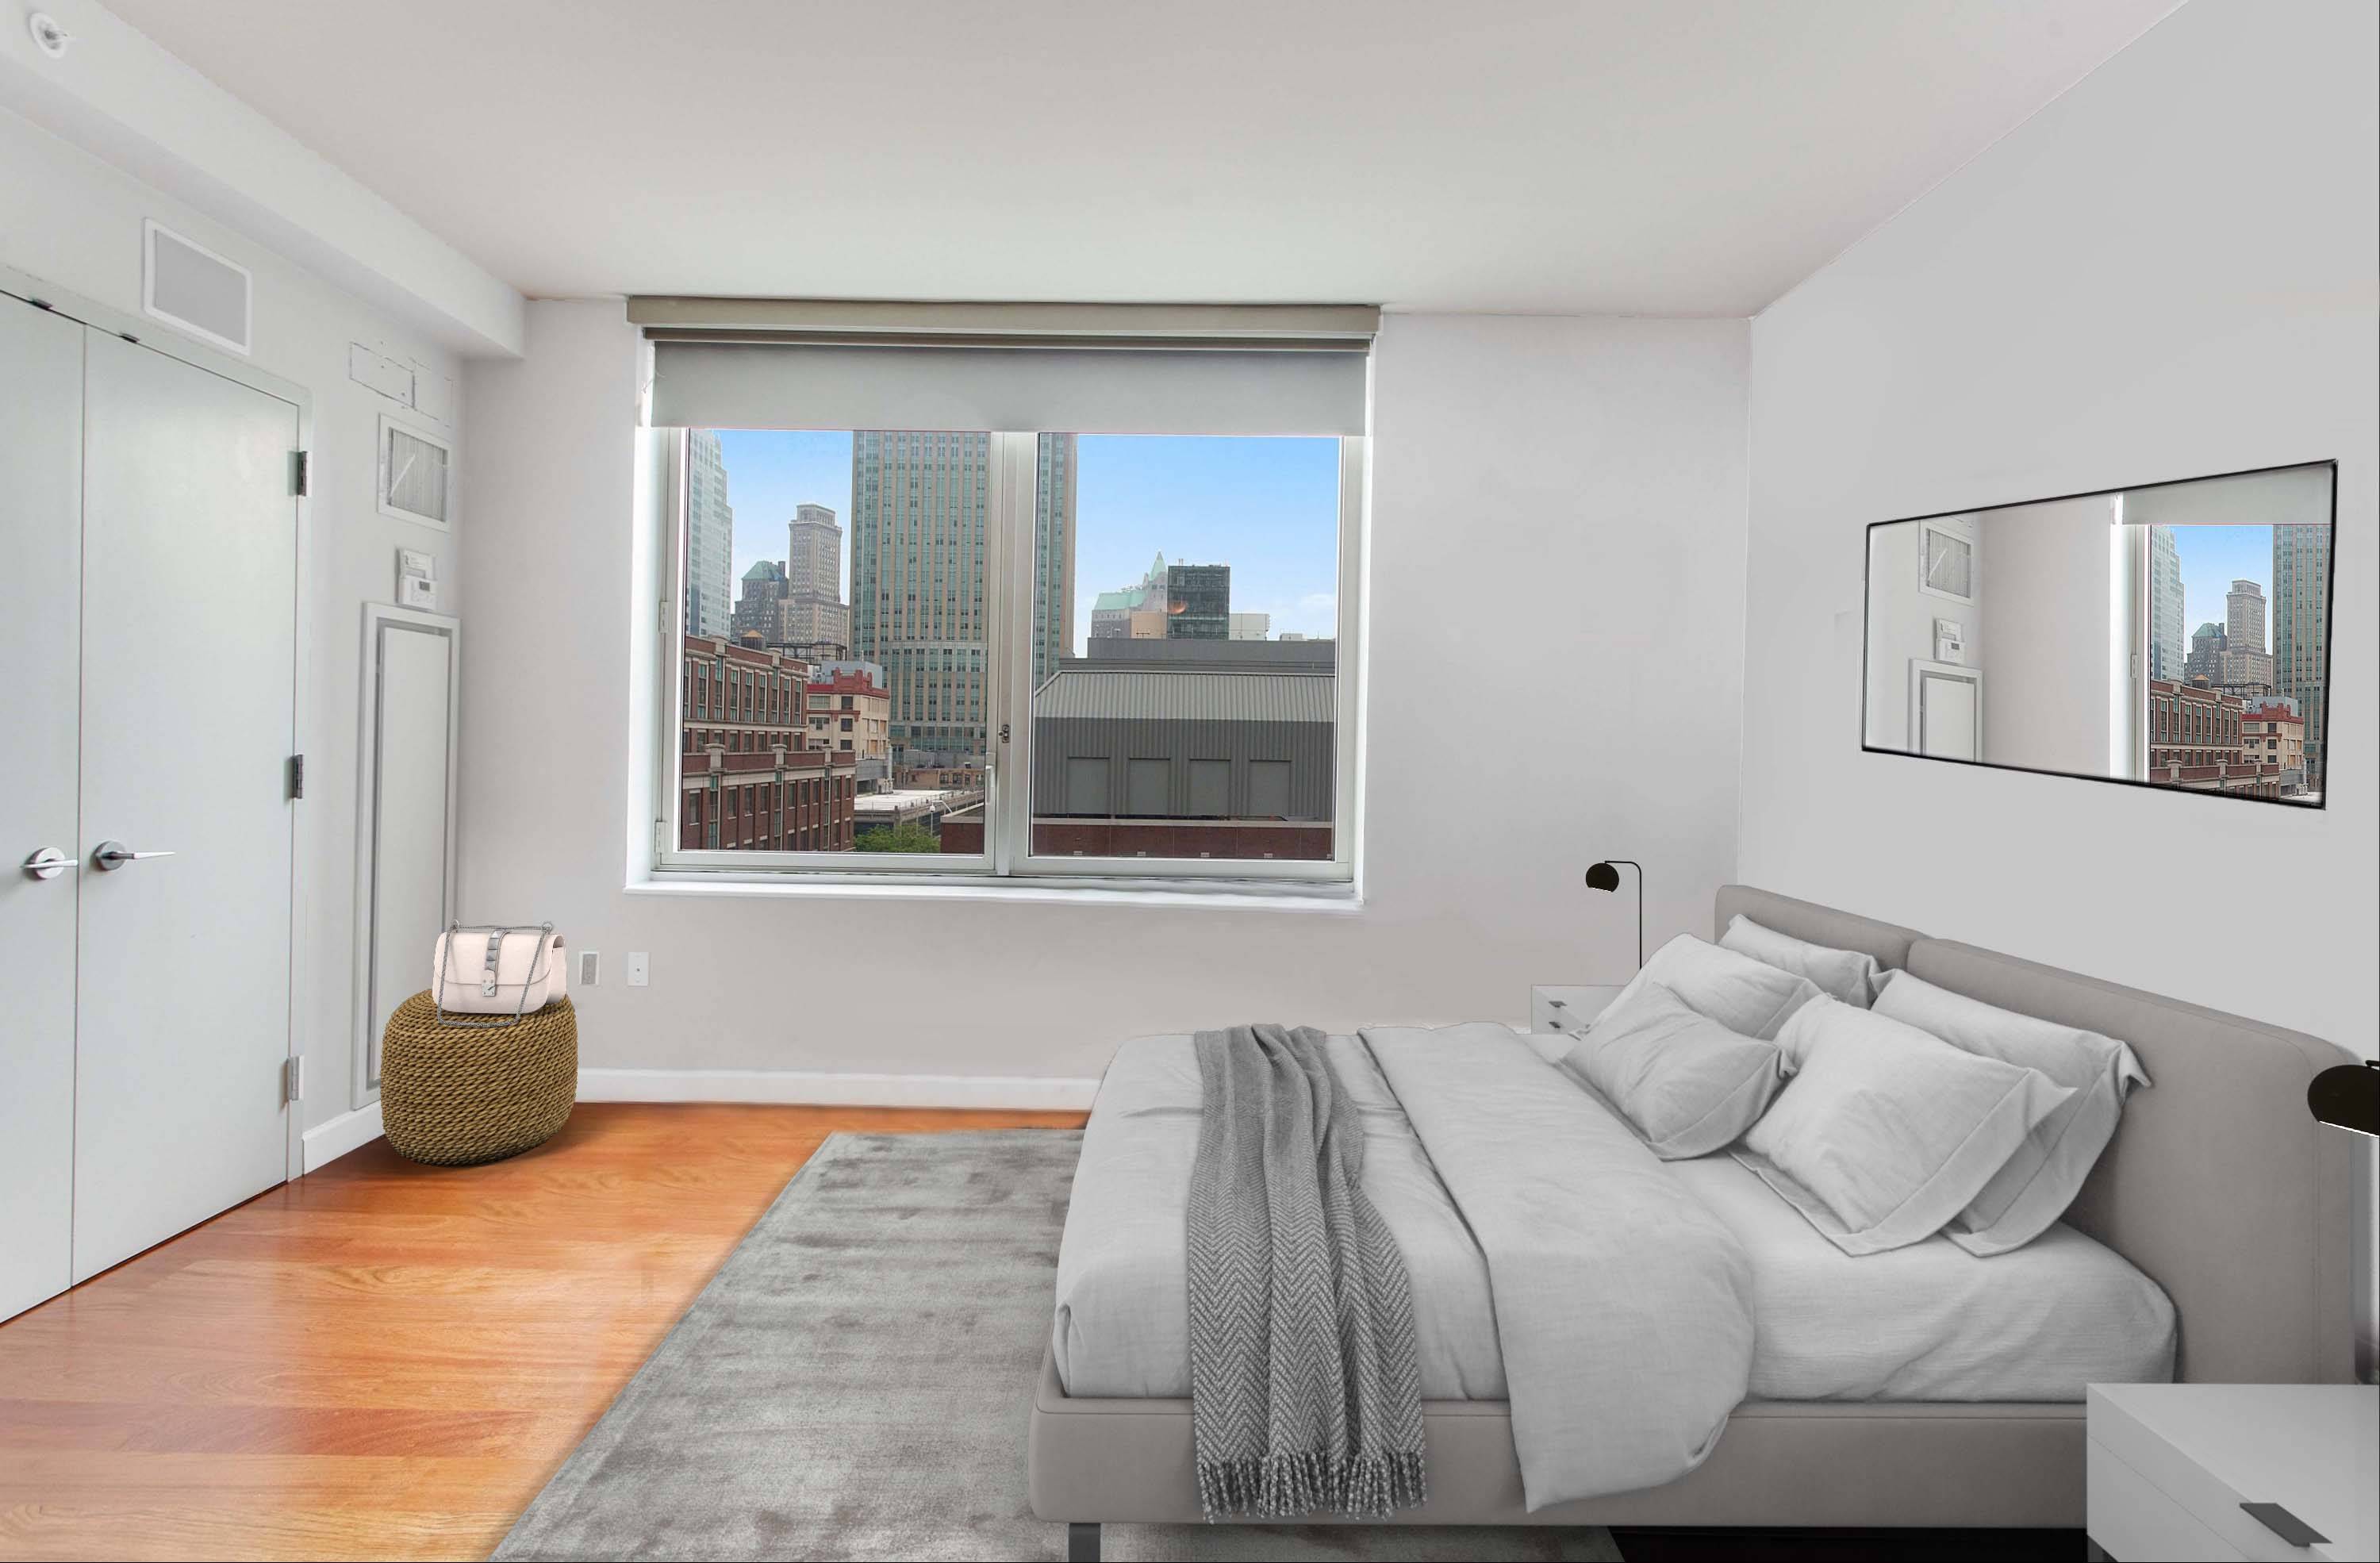 Extremely rare offering of this expertly renovated one bedroom E line residence at the highly coveted Oro Condominium located in the heart of Downtown Brooklyn.